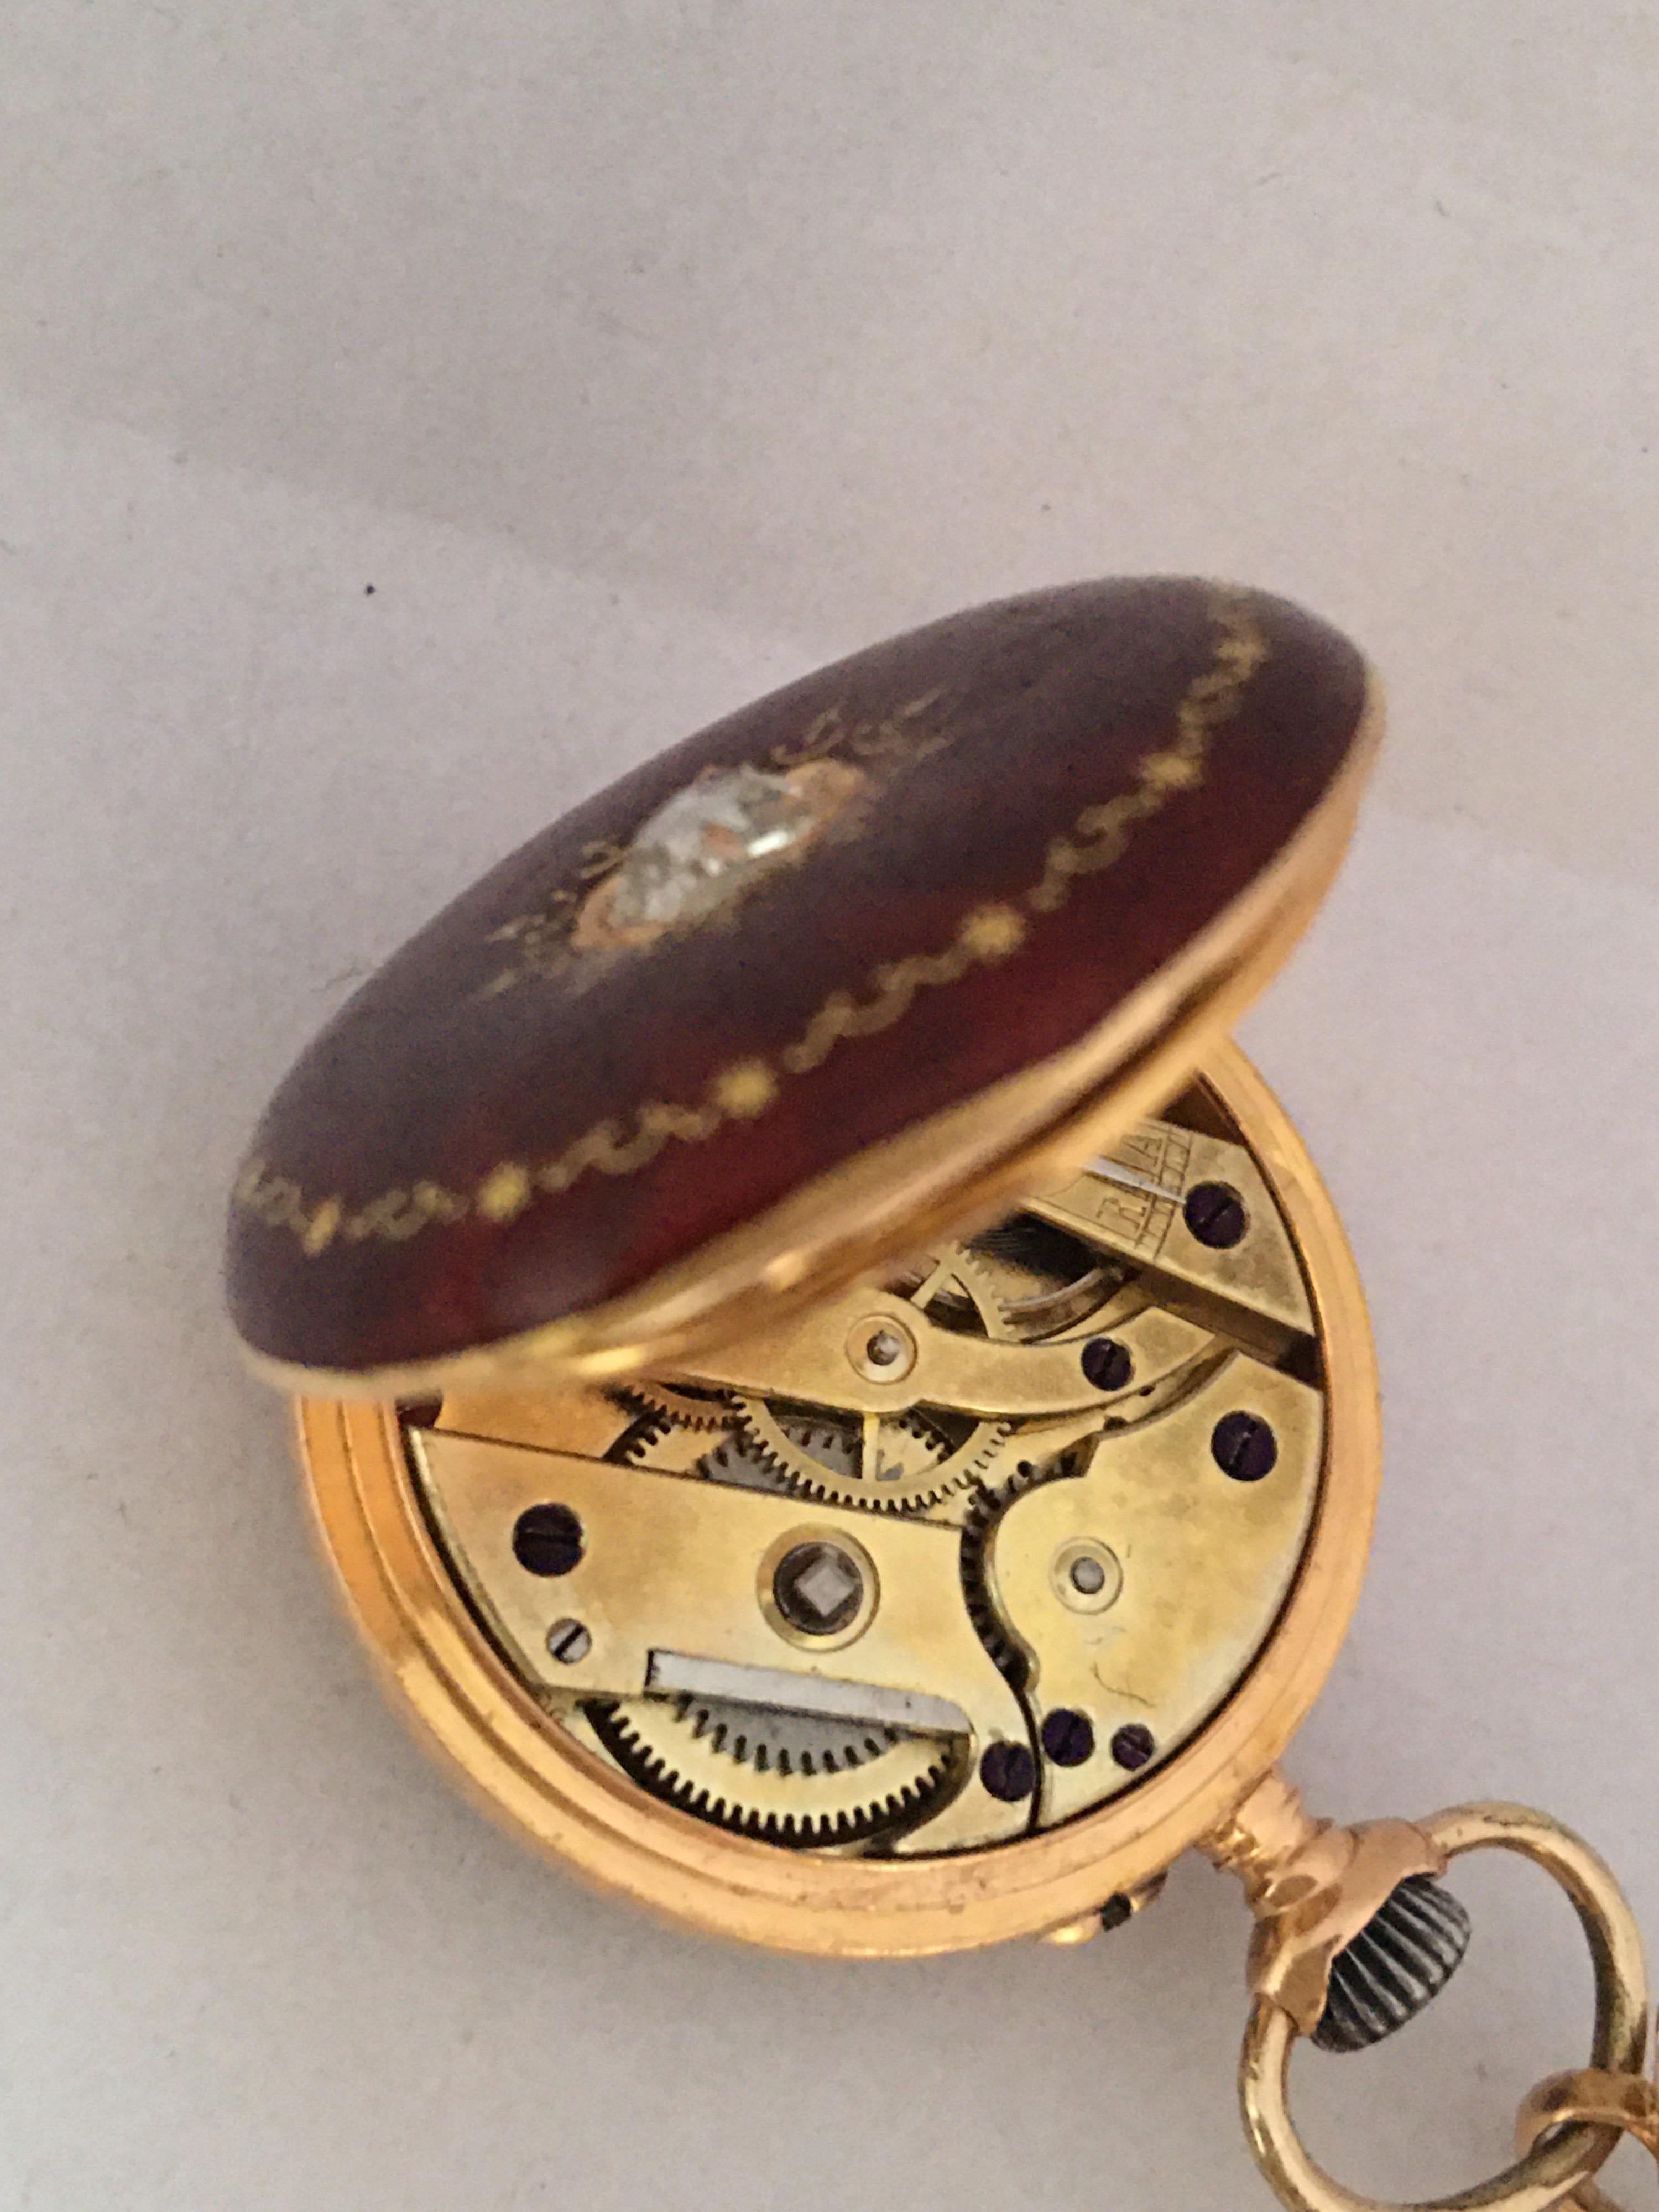 14 Karat Gold and Diamonds Red Enamel Mechanical Ladies Fob or Brooch Watch For Sale 1